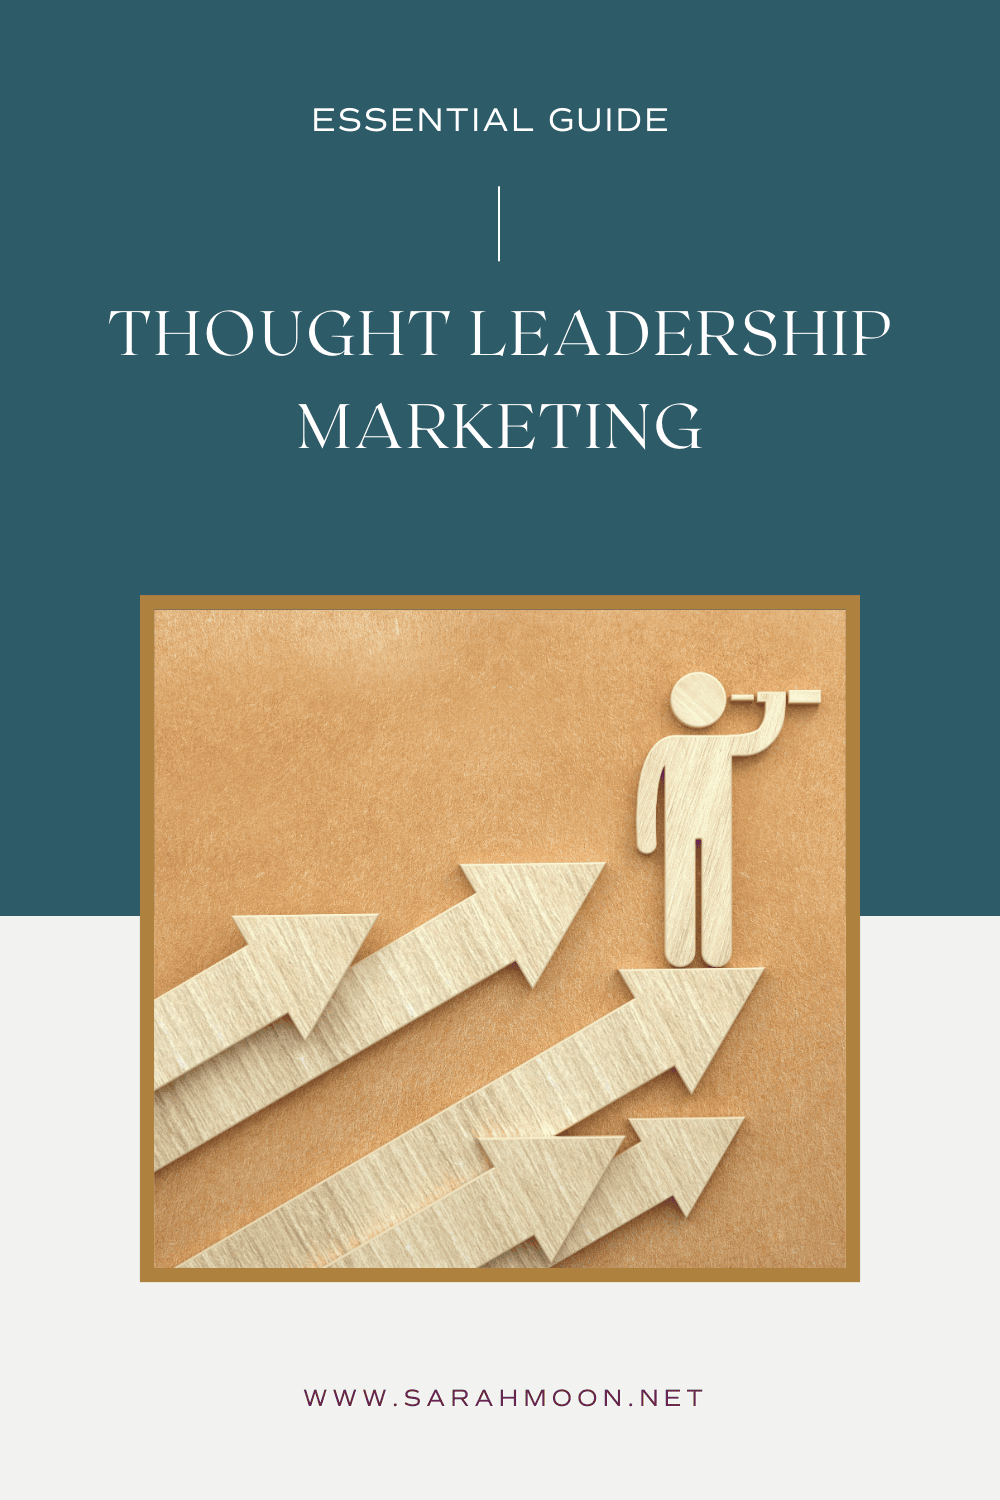 The Essential Guide to Thought Leadership Marketing